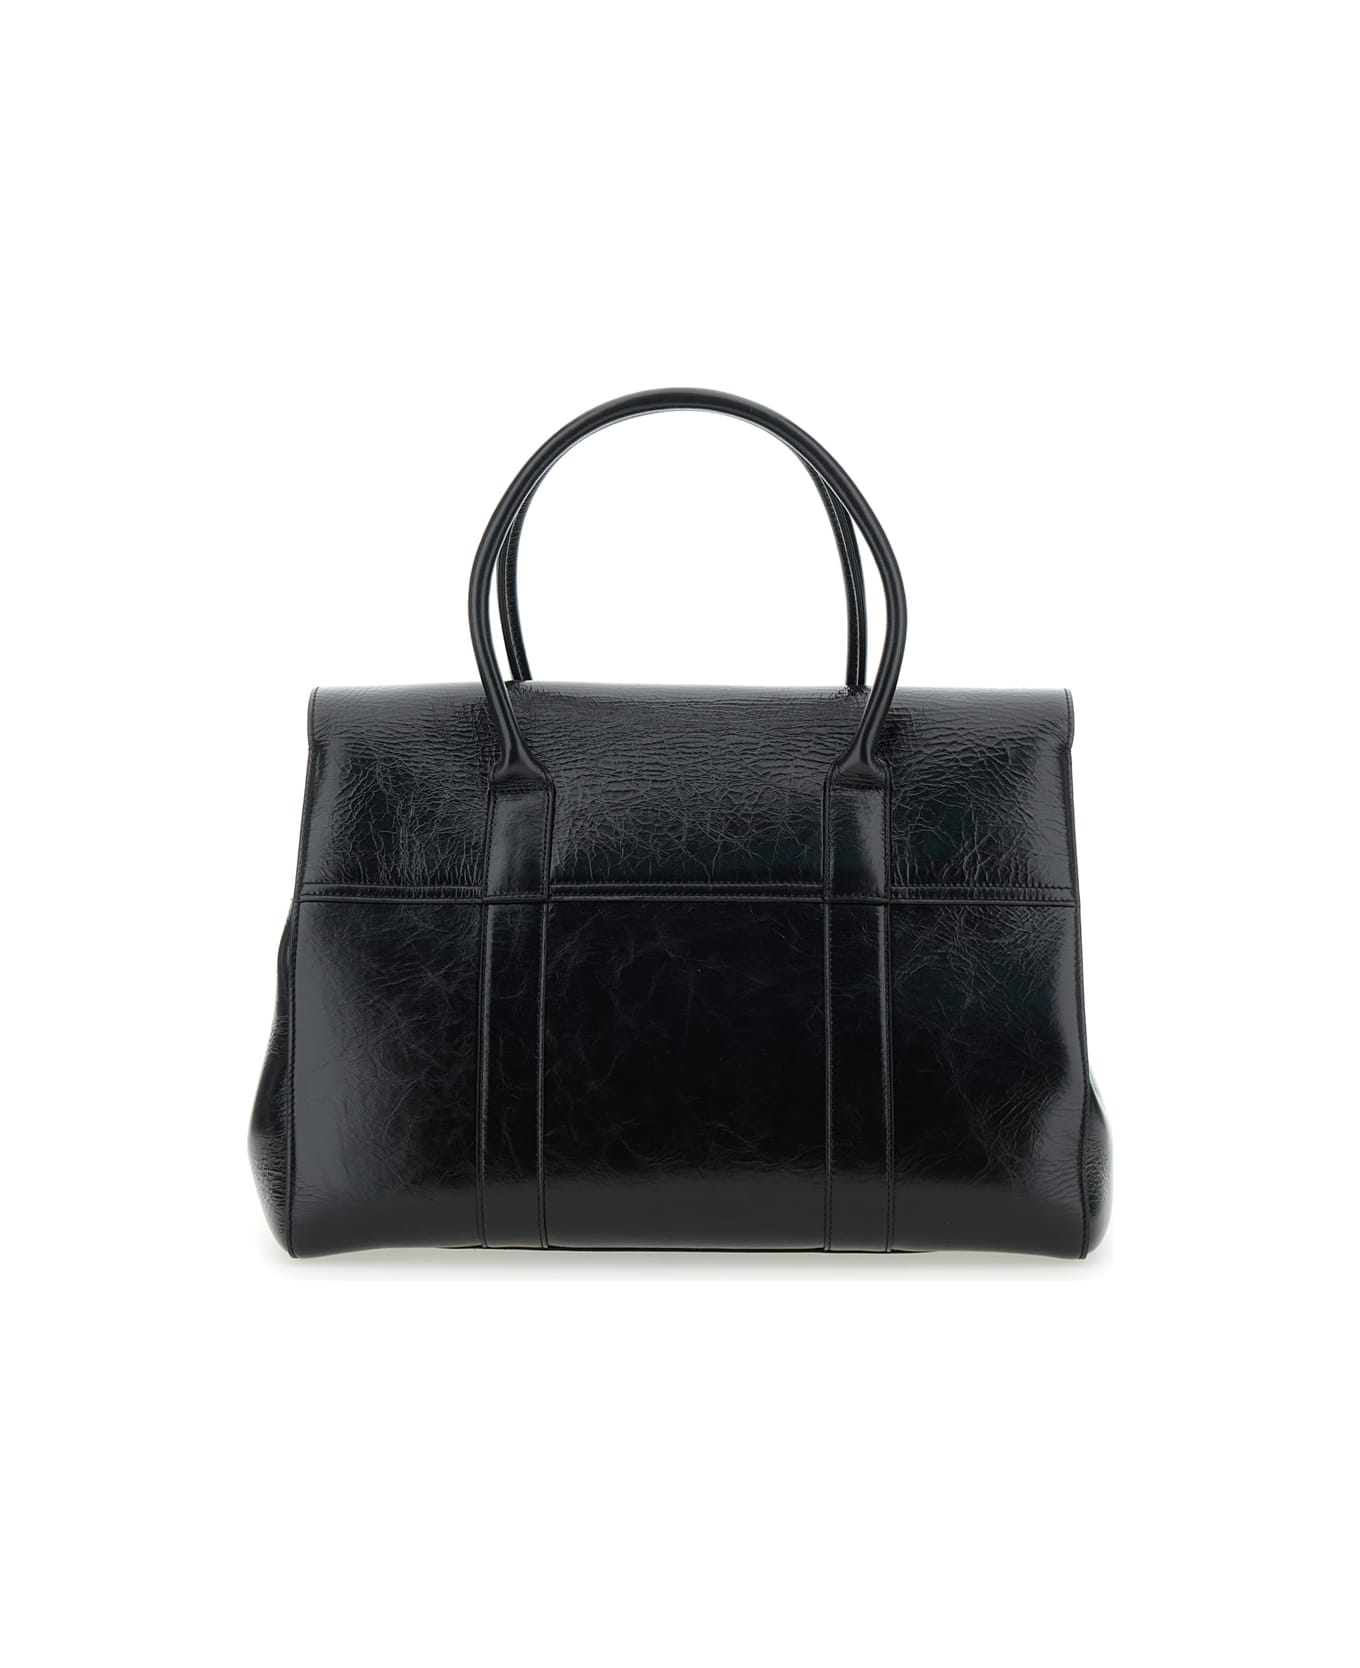 Mulberry 'bayswater' Black Handbag With Postman's Lock Closure In Leather Woman - Black